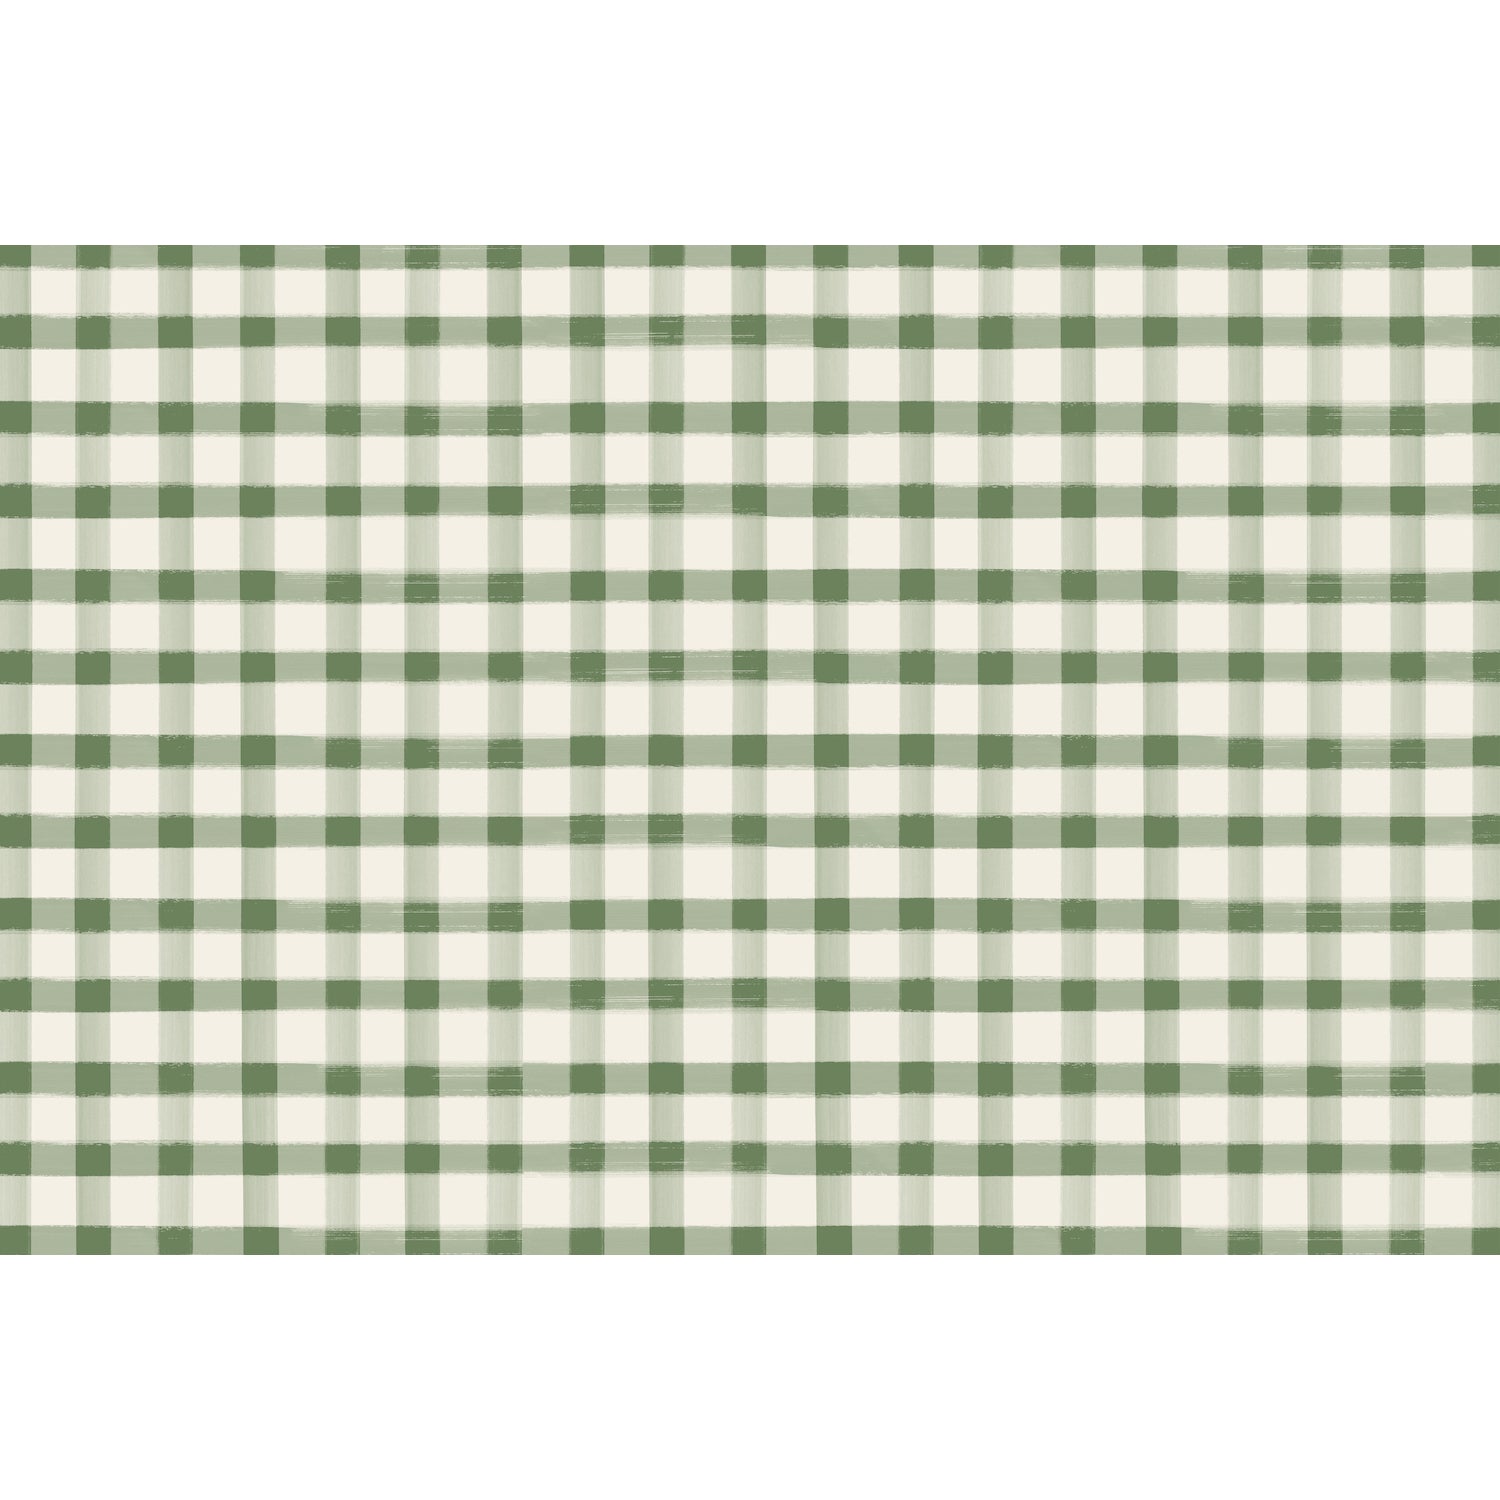 A painted gingham grid check pattern made of pale green lines intersecting at deep green squares, on a white background.